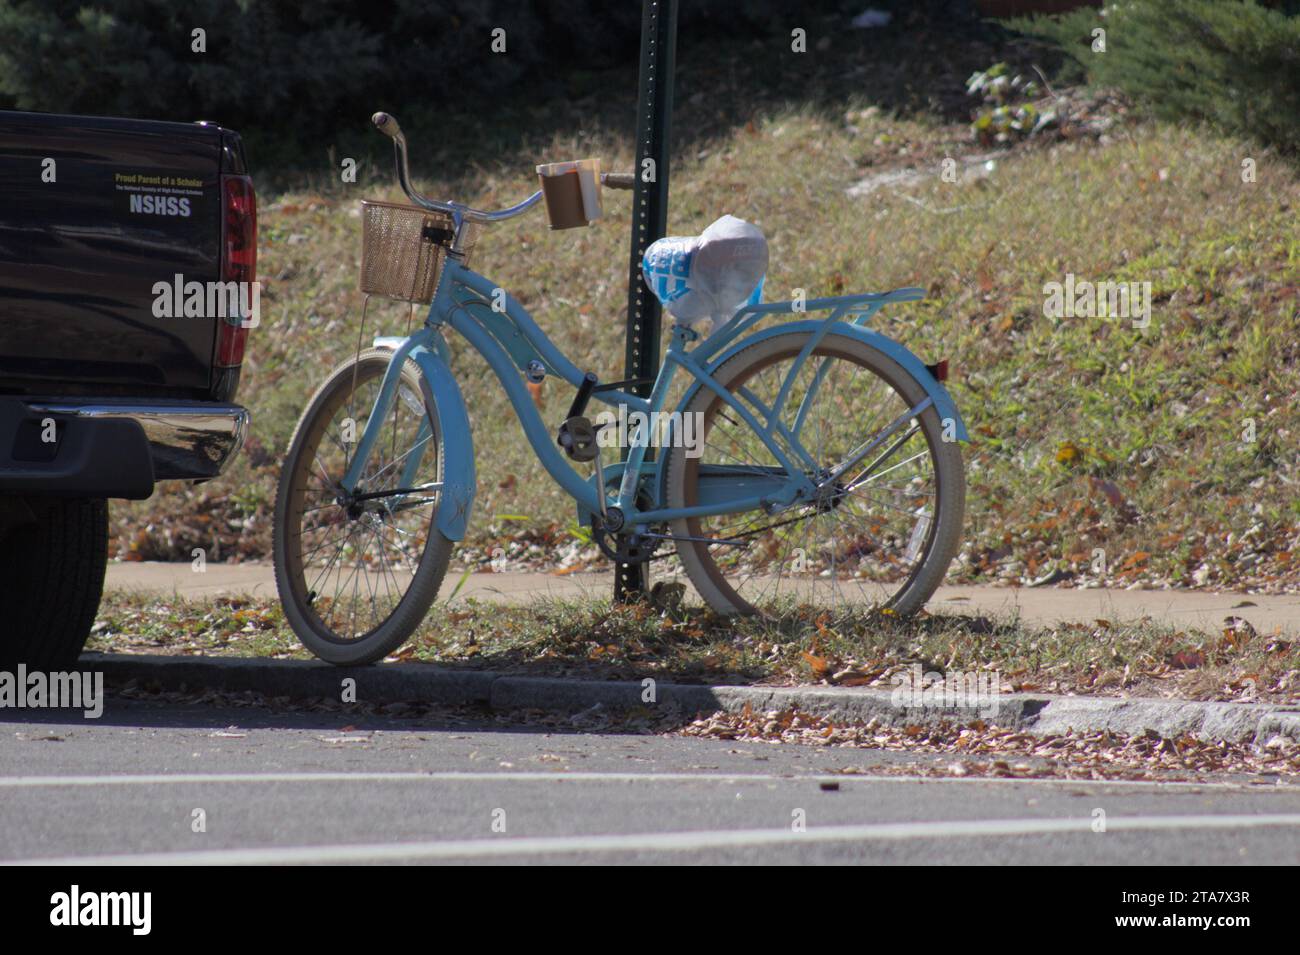 A soft baby blue bike in center. Stock Photo